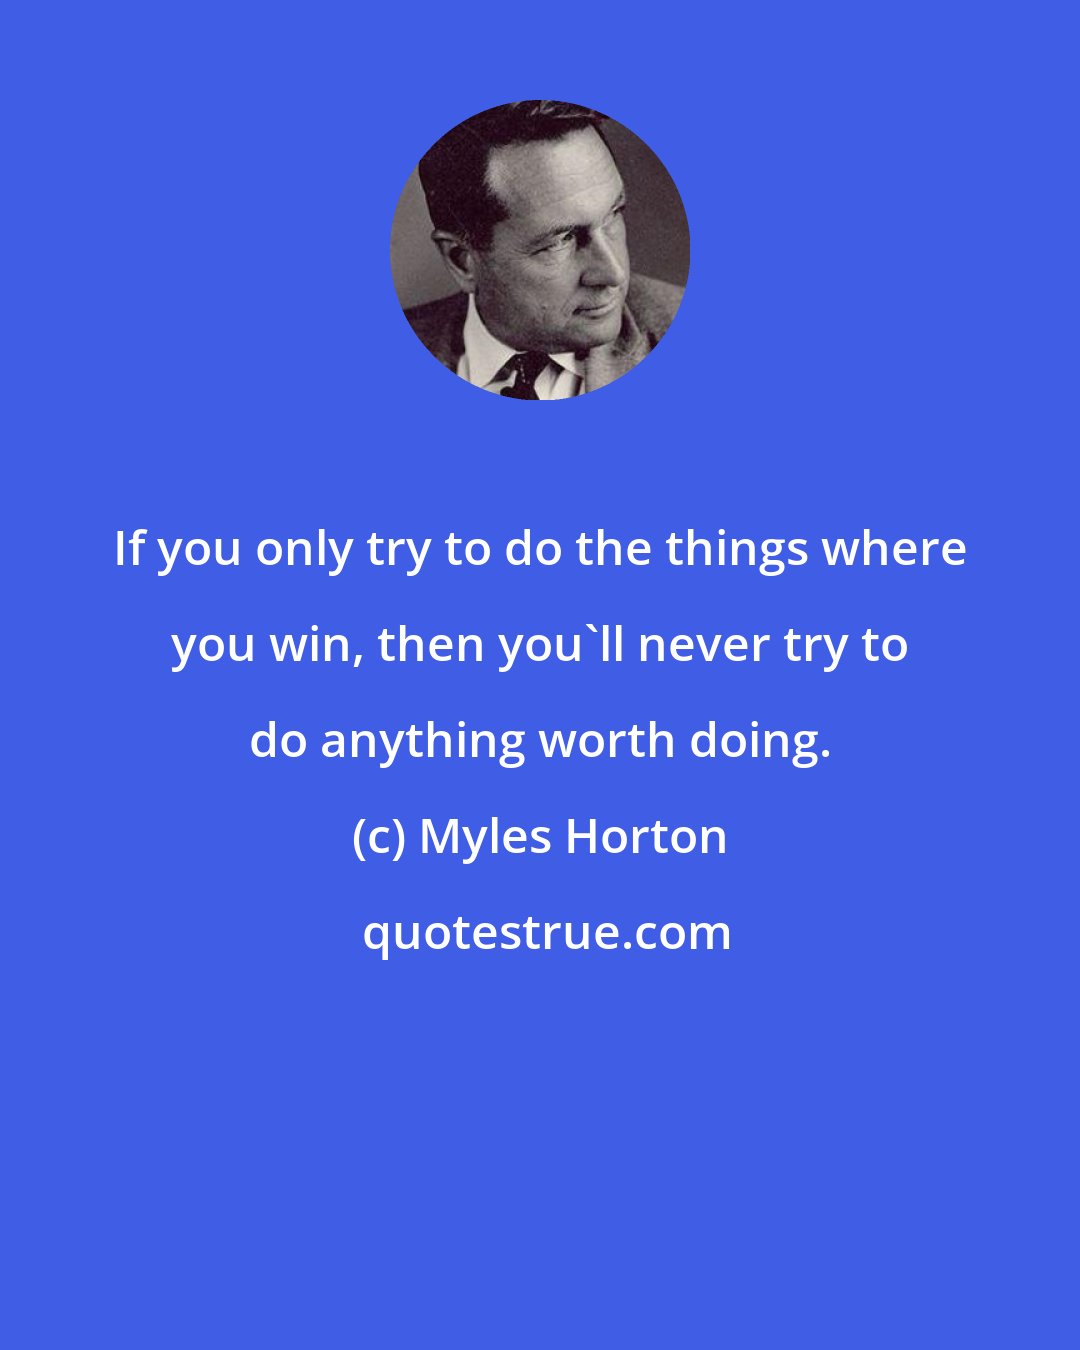 Myles Horton: If you only try to do the things where you win, then you'll never try to do anything worth doing.